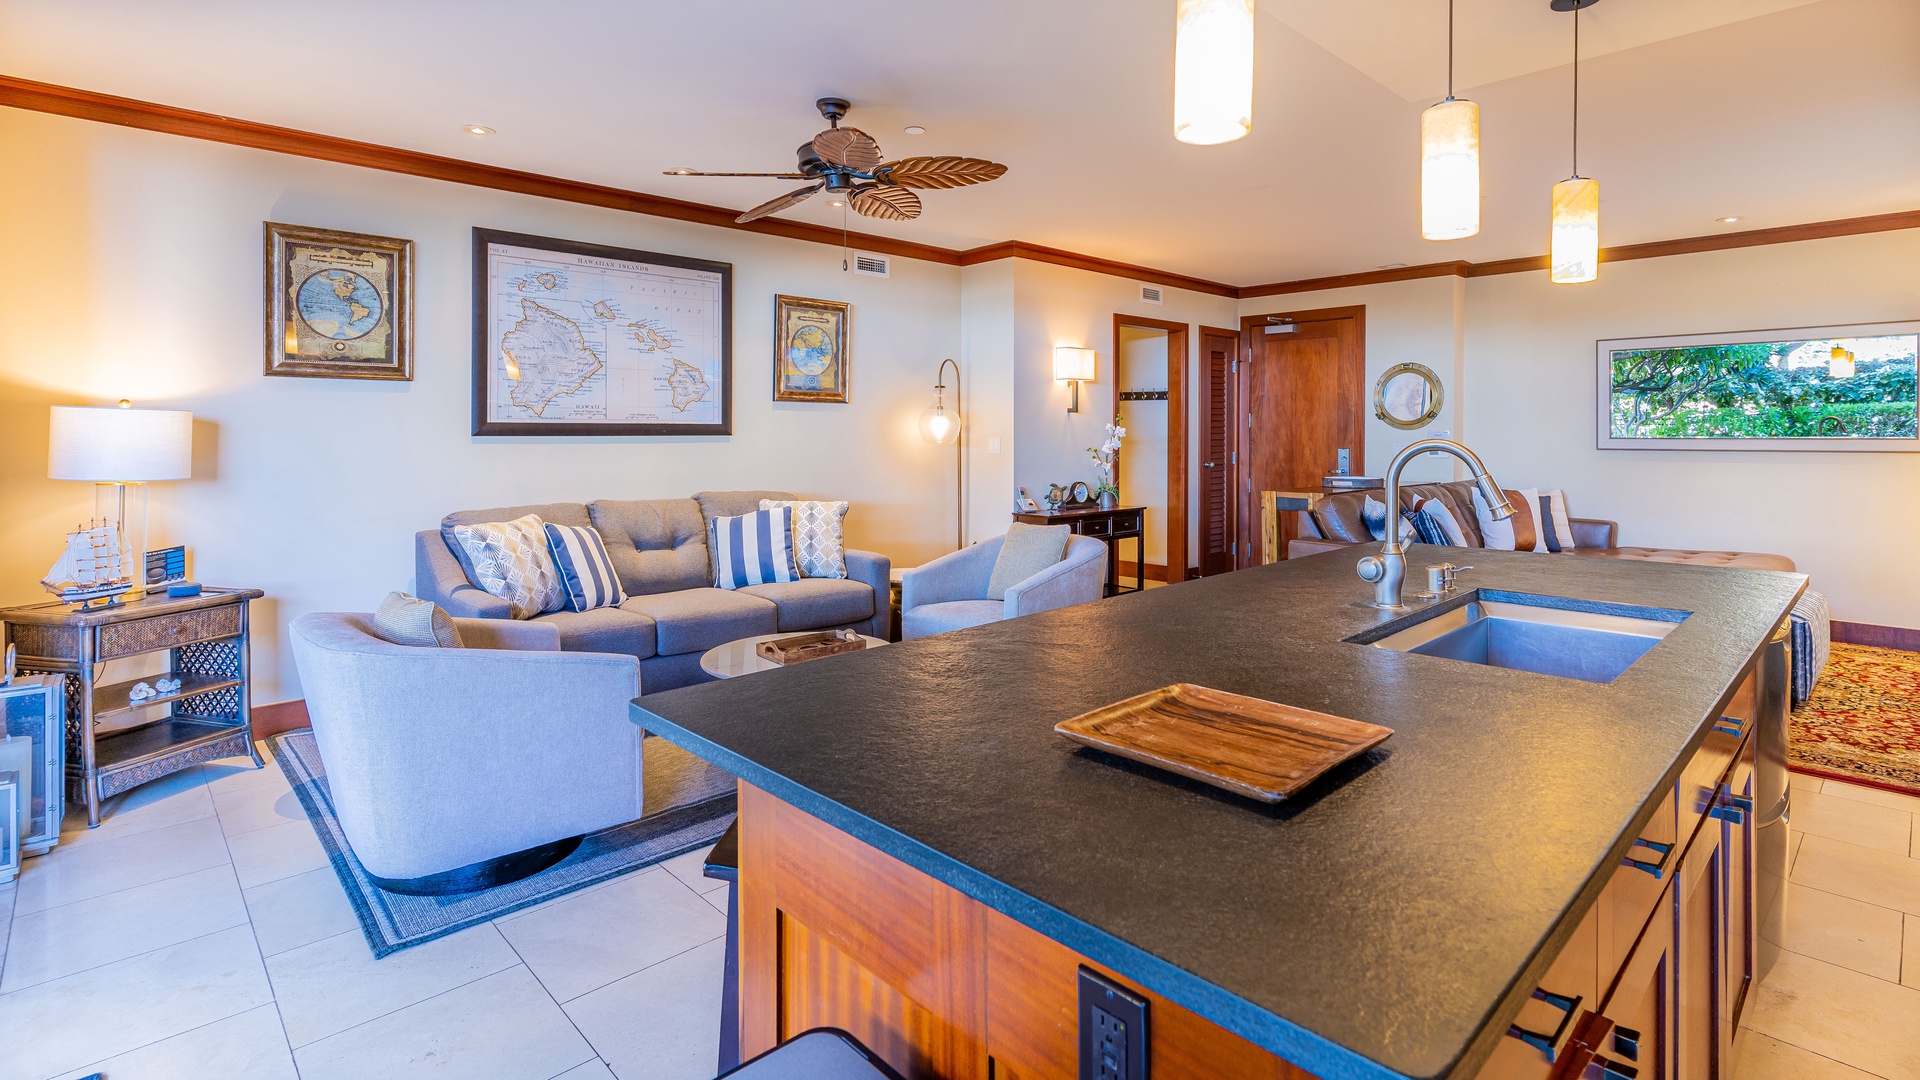 Kapolei Vacation Rentals, Ko Olina Beach Villas B102 - The spacious living area is also convenient for visiting with the chef.